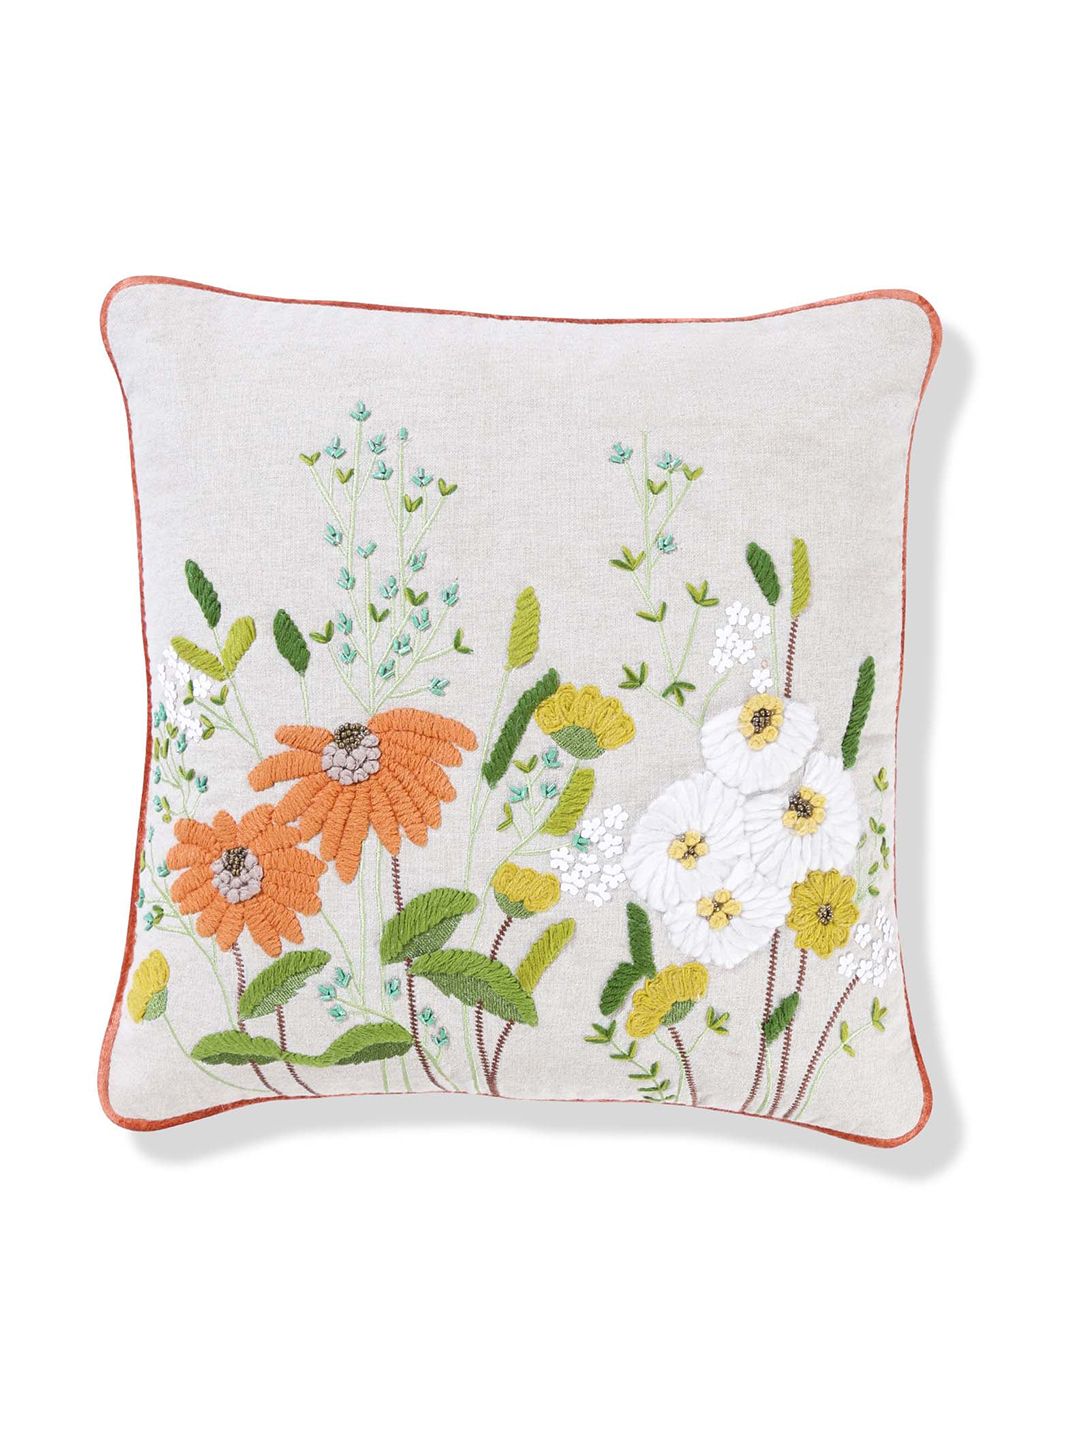 haus & kinder White & Orange Embroidered Square Cushion Cover Price in India